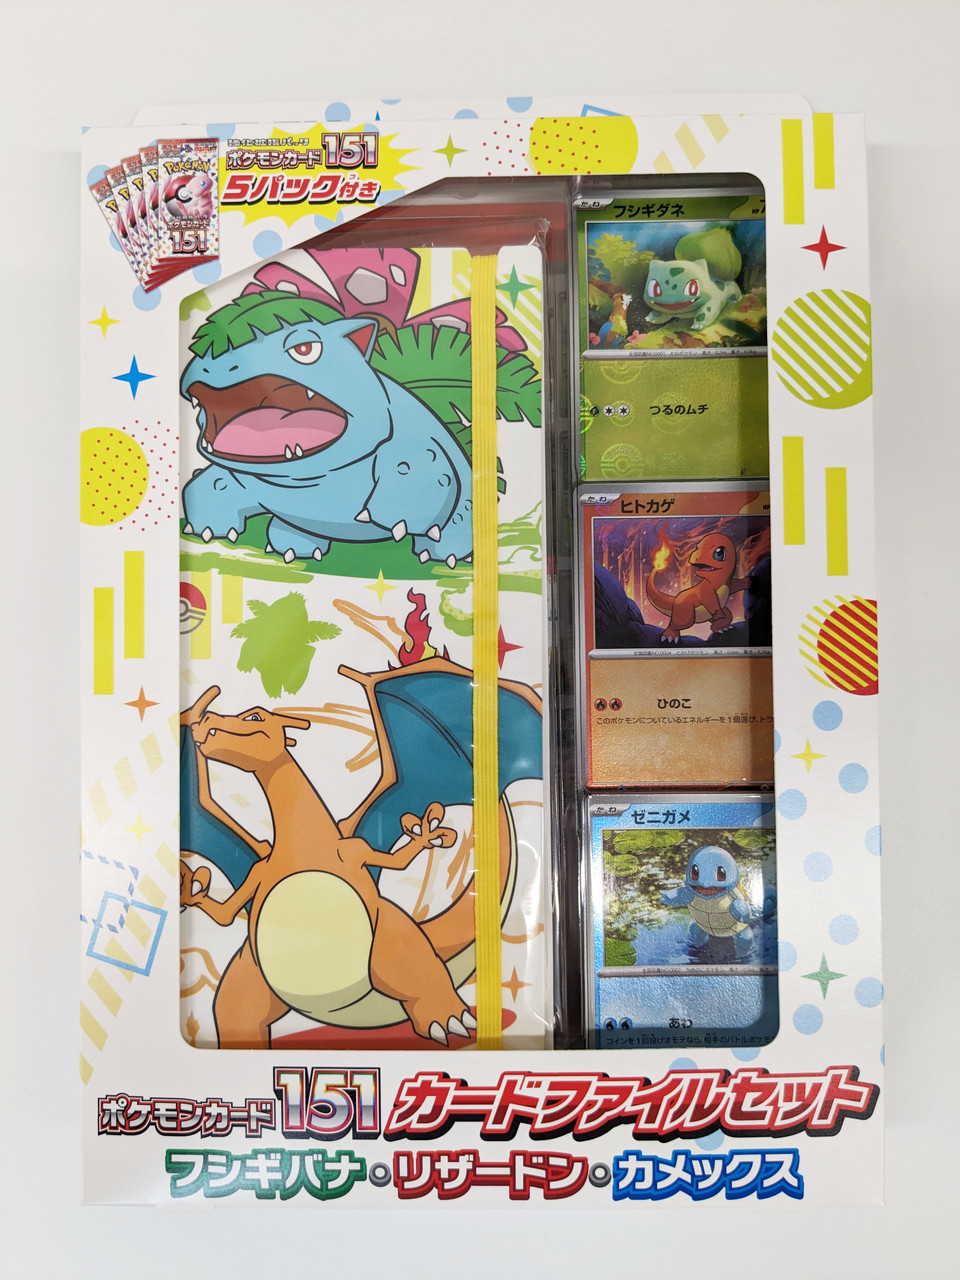 (1 Pack) Pokemon Card Game Japanese 151 SV2a Booster Pack (7 Cards Per Pack)